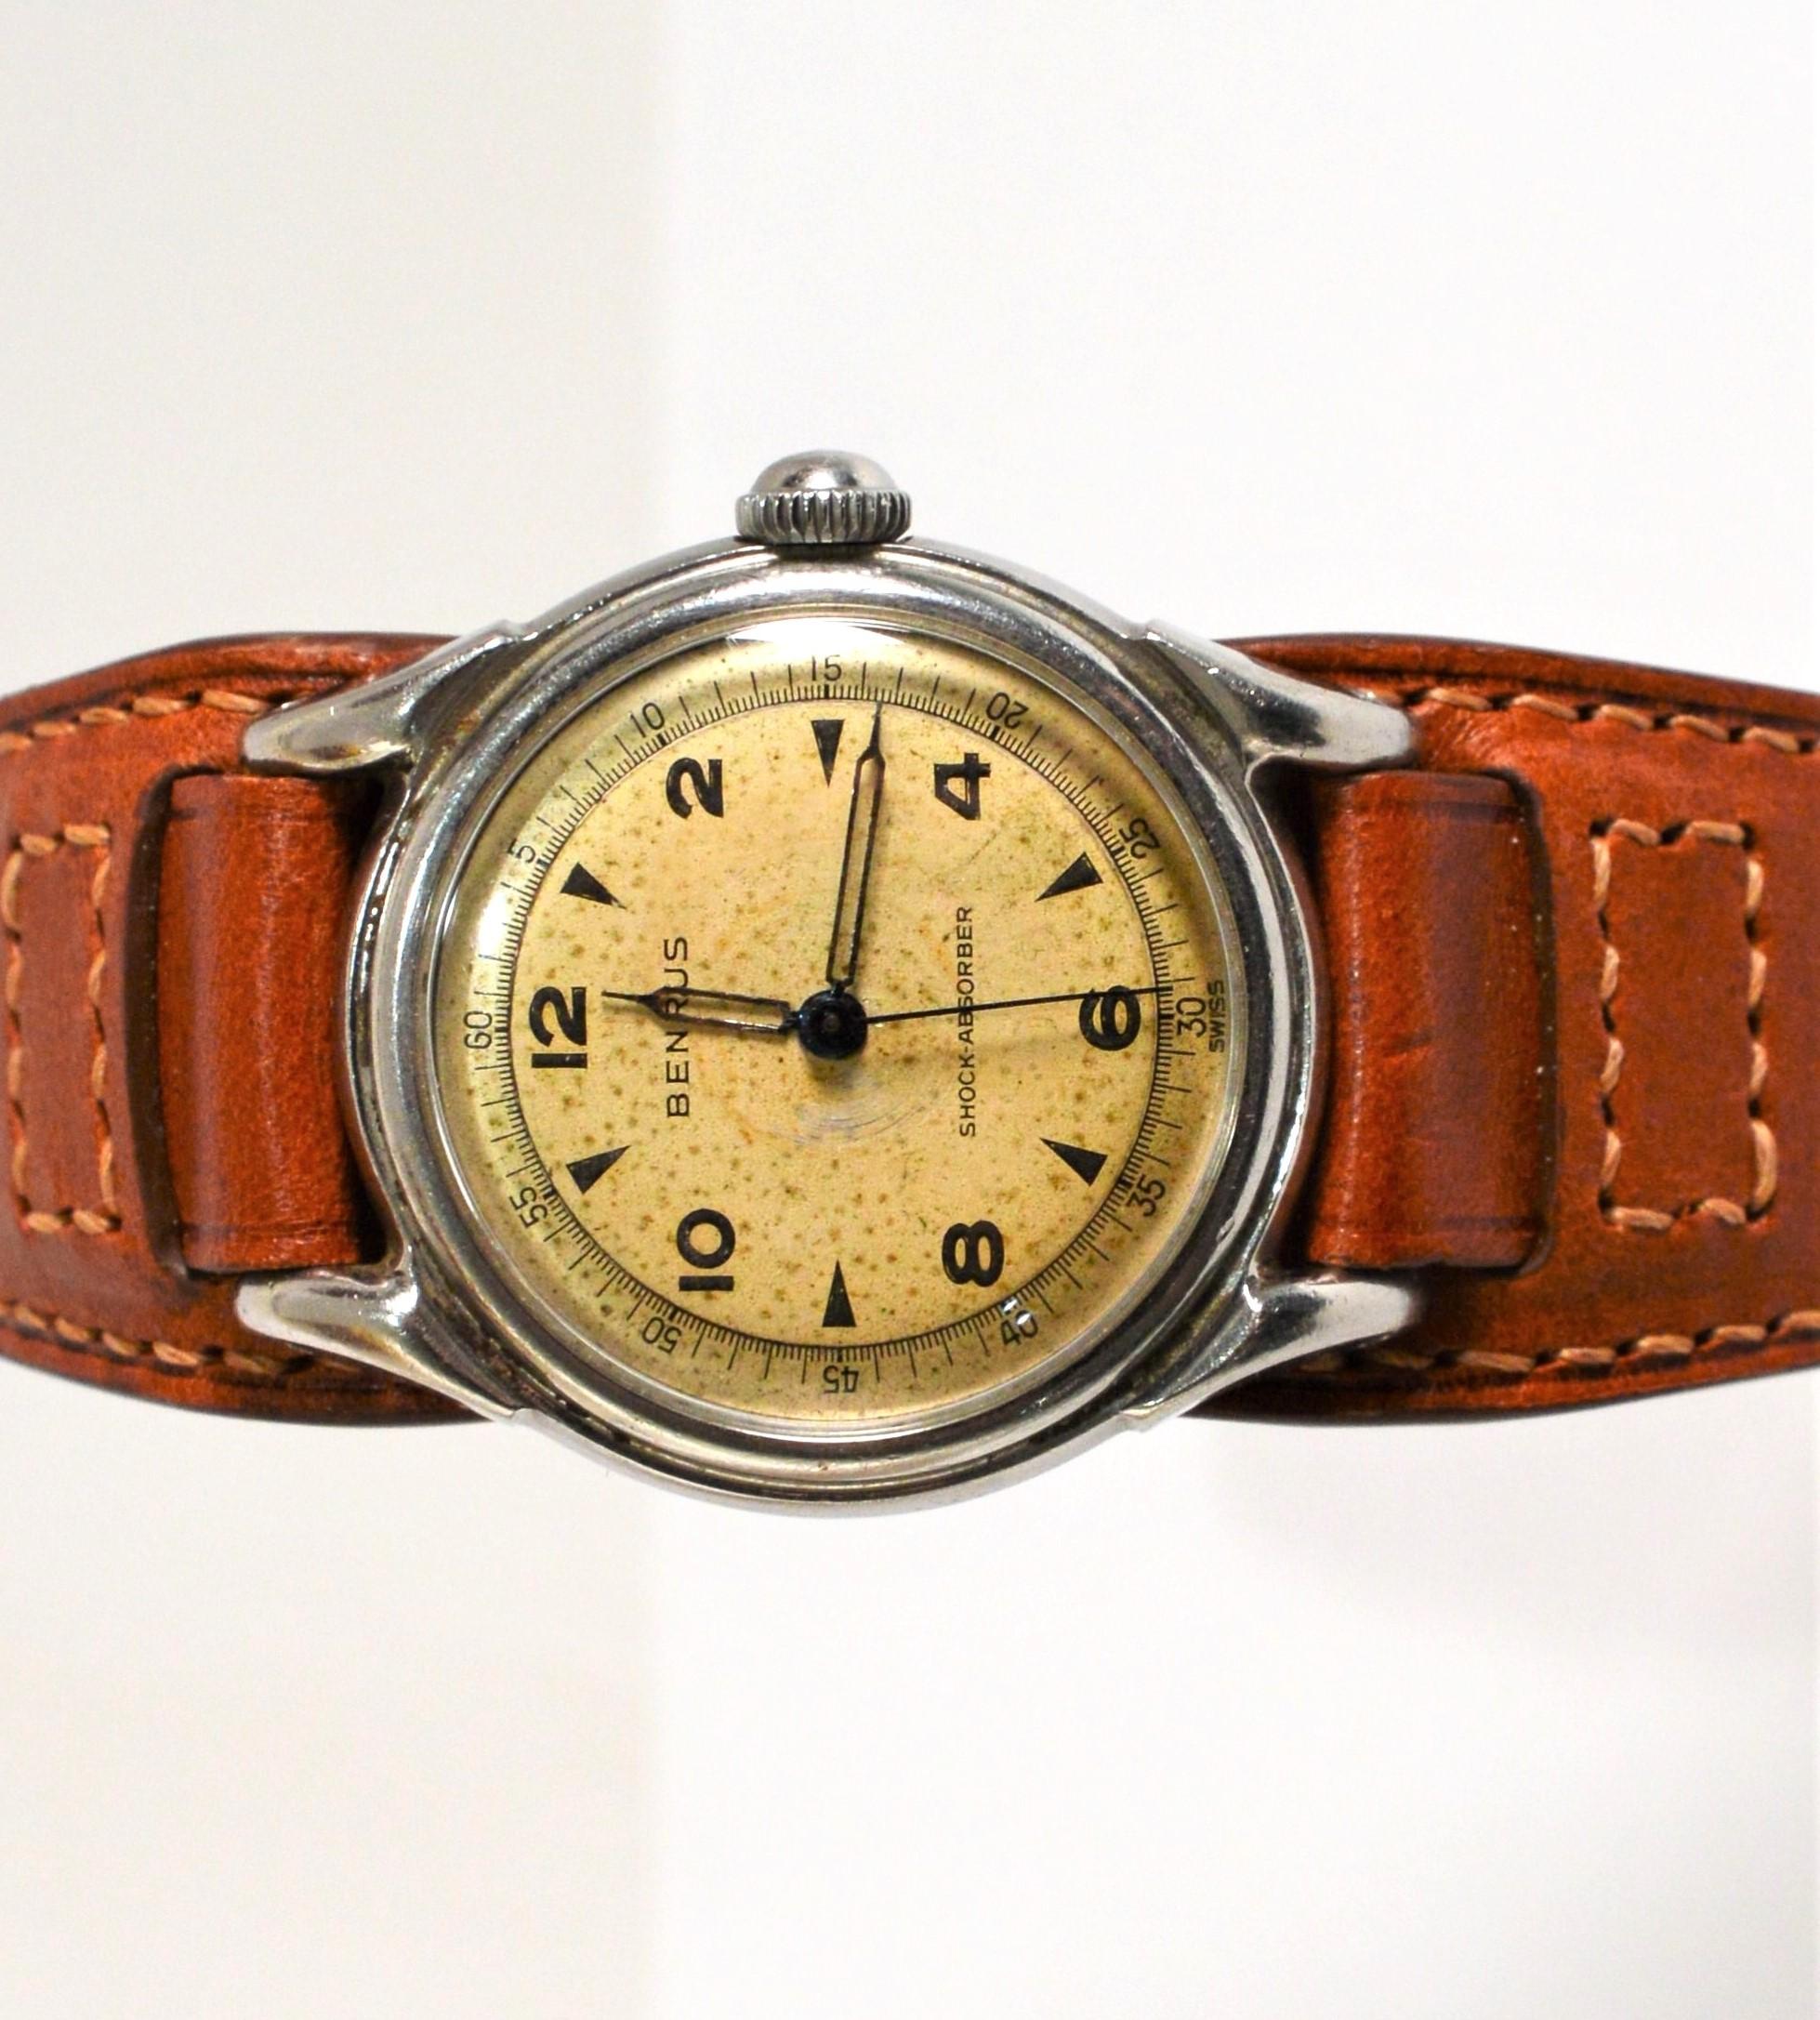 Vintage Benrus Military Style Wrist Watch with Leather Bund Strap For Sale 1